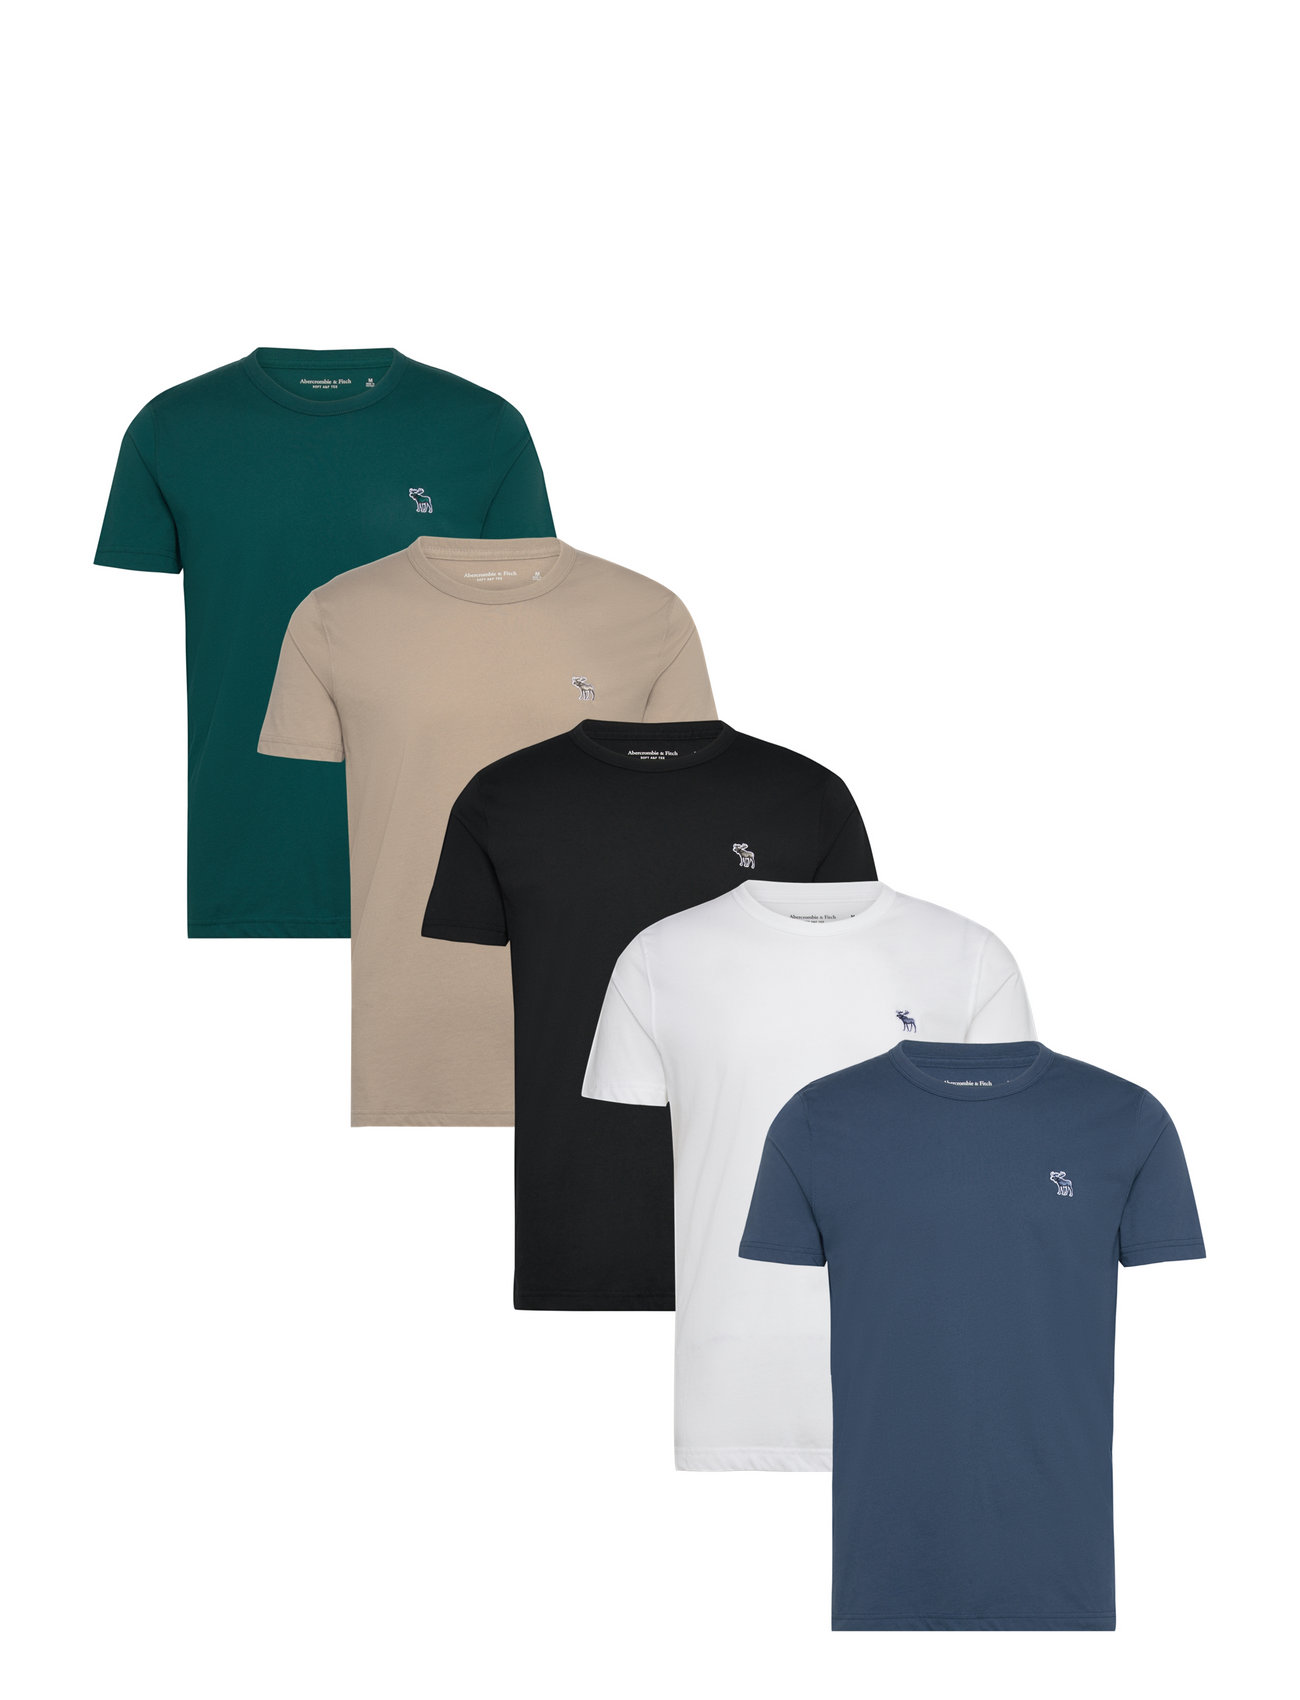 Abercrombie & Fitch Anf Mens Knits - T-Shirts 